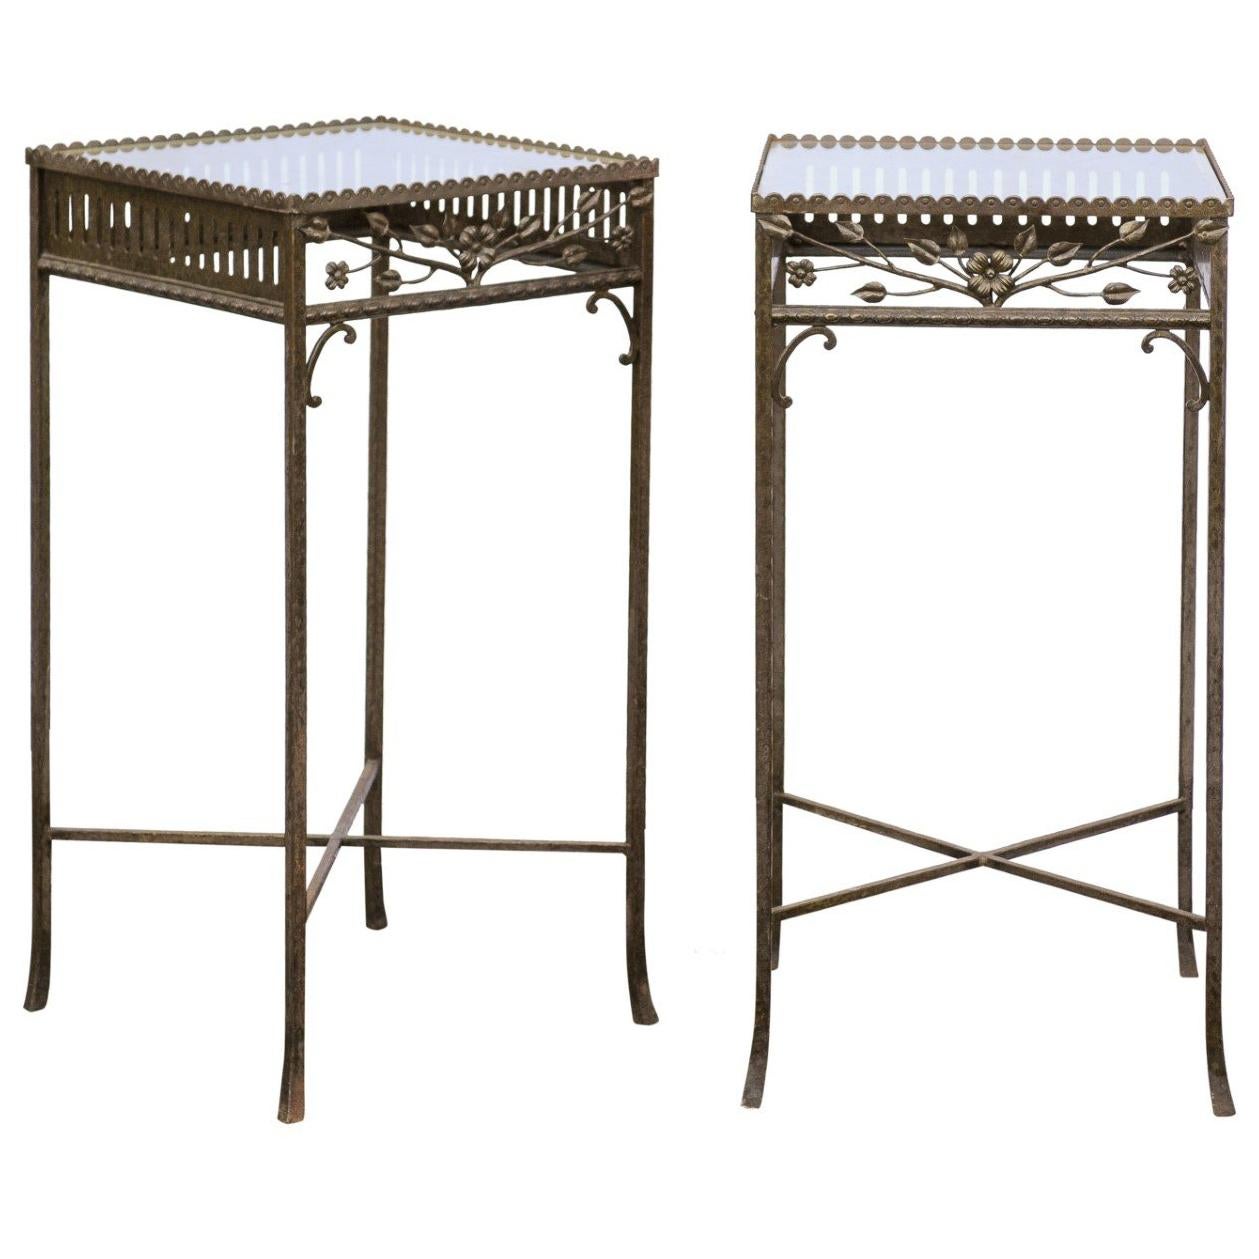 Pair of French Hand-Wrought Iron Side Tables with Floral Motifs, circa 1900